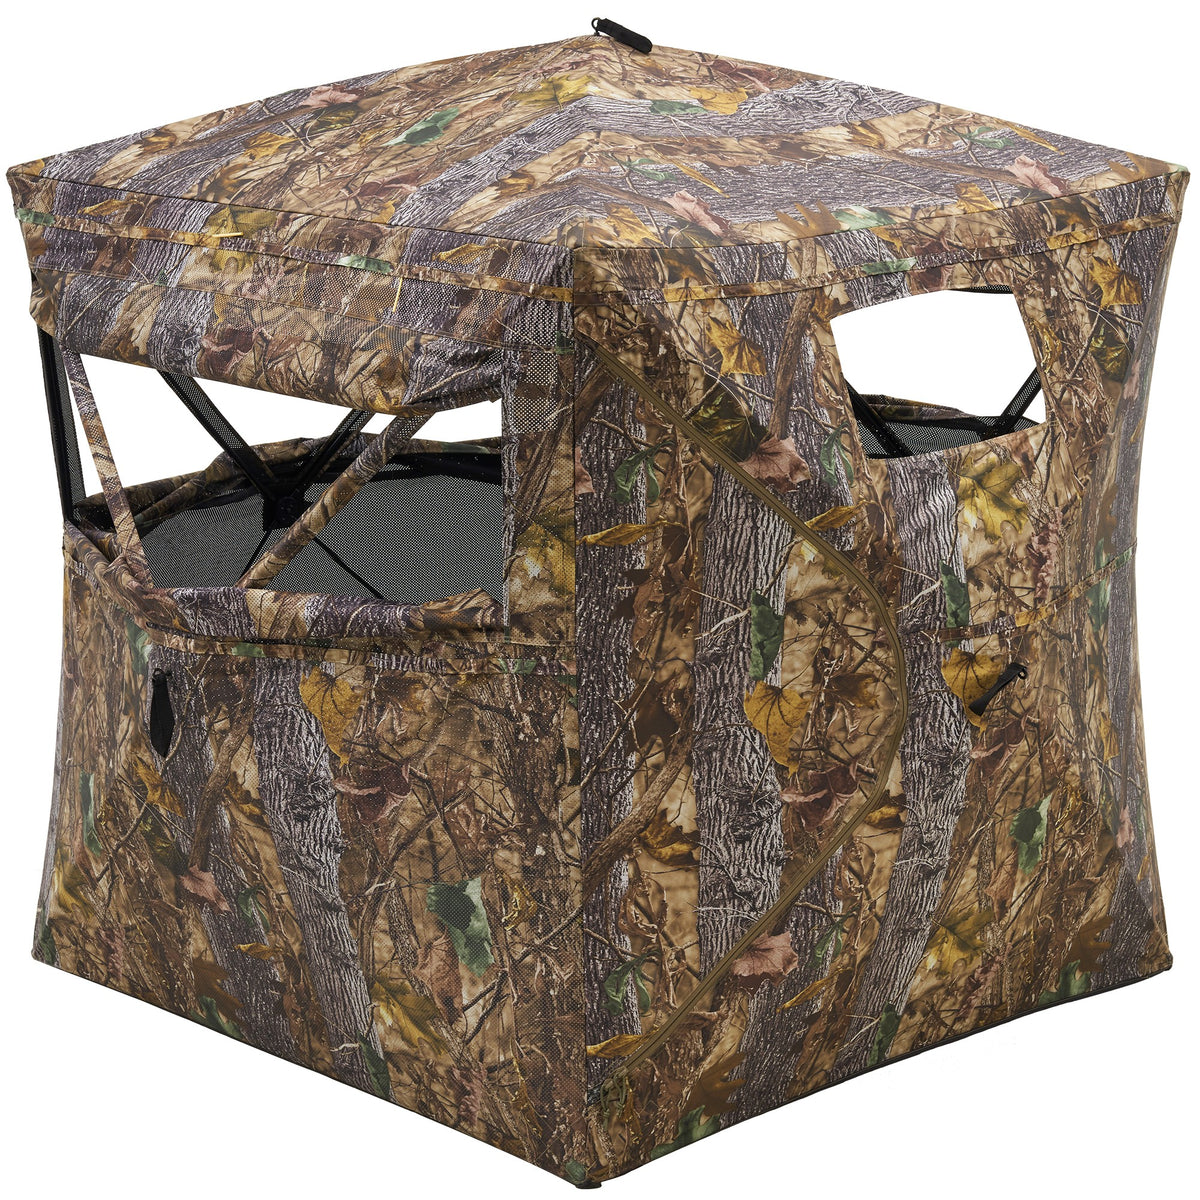 RPNB HGB-1 Hunting Blind One-Way 270 Degree See Through 2-3 Person Portable Pop-Up With See Through Area 2